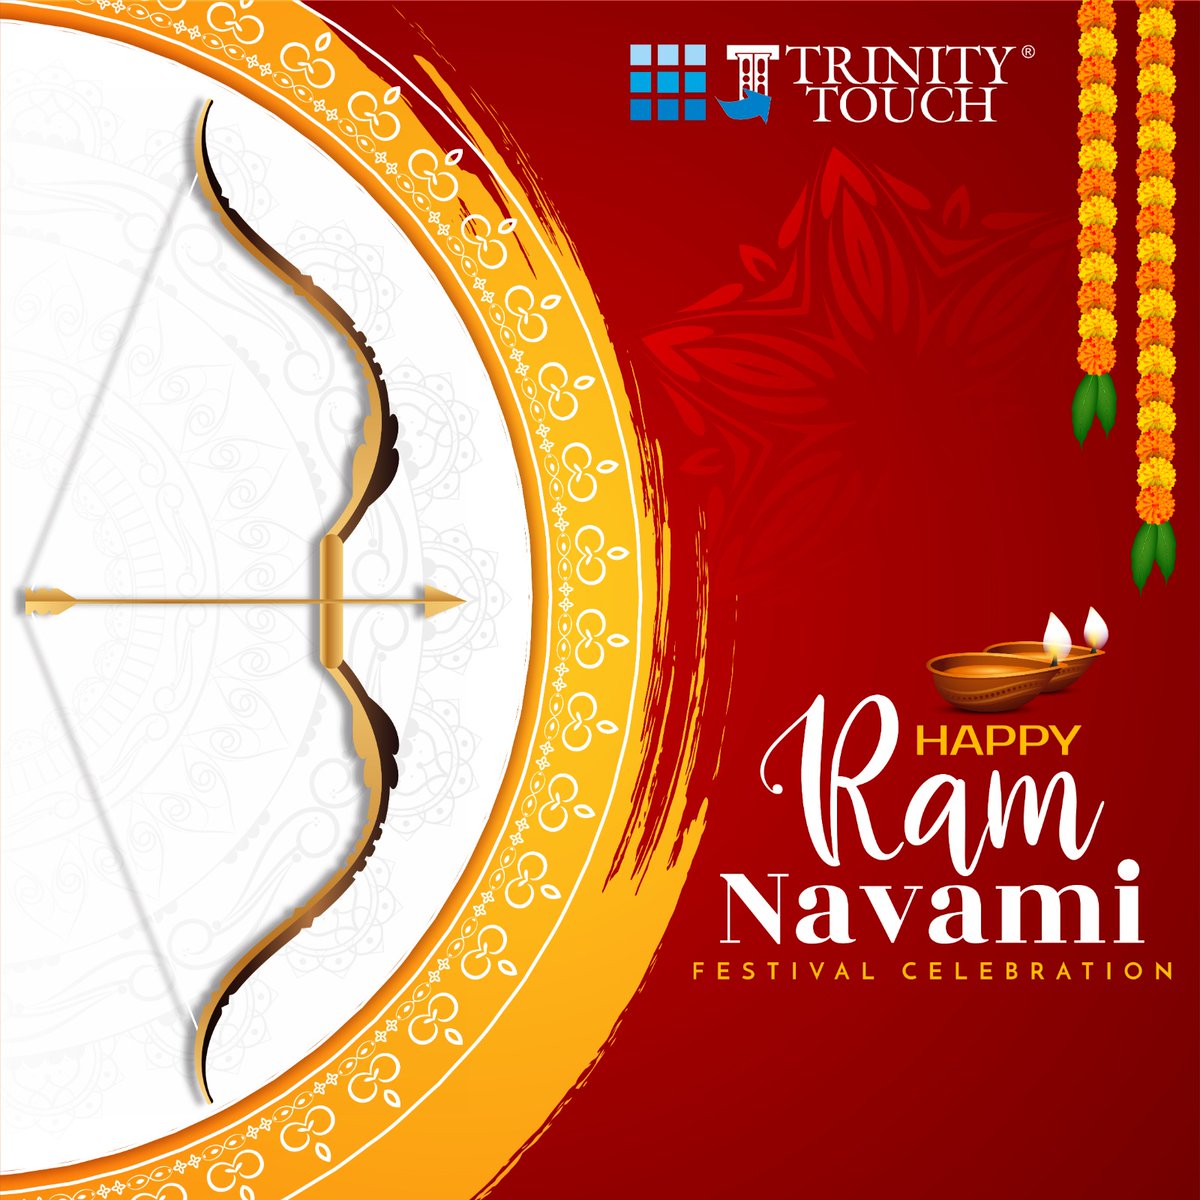 May the blessings of Ram Navami inspire clarity and success in all endeavours

#ramnavmi #india #festival #celebrations #peace #propserity #brotherwood

#trinitytouch